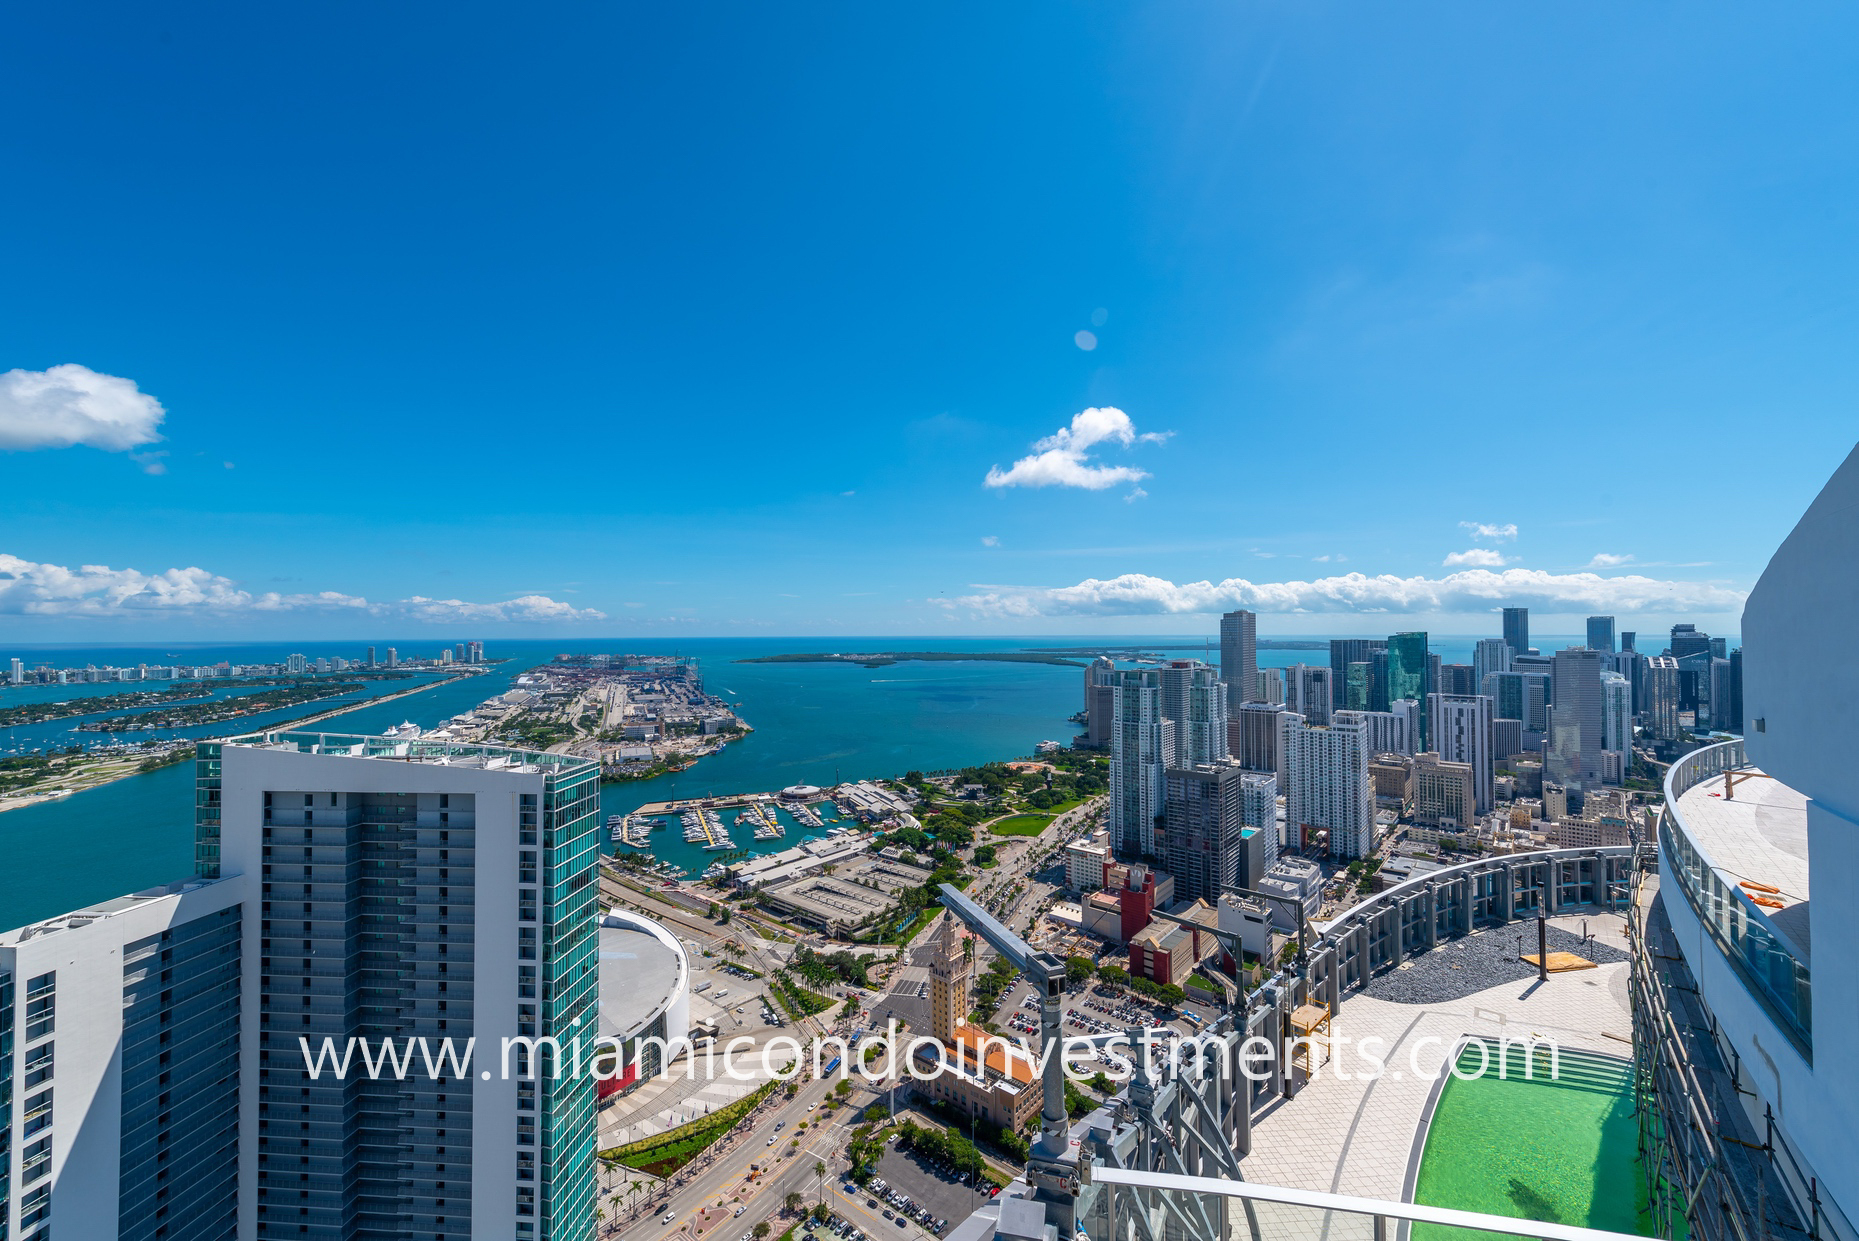 Views southeast from atop Paramount Miami Worldcenter